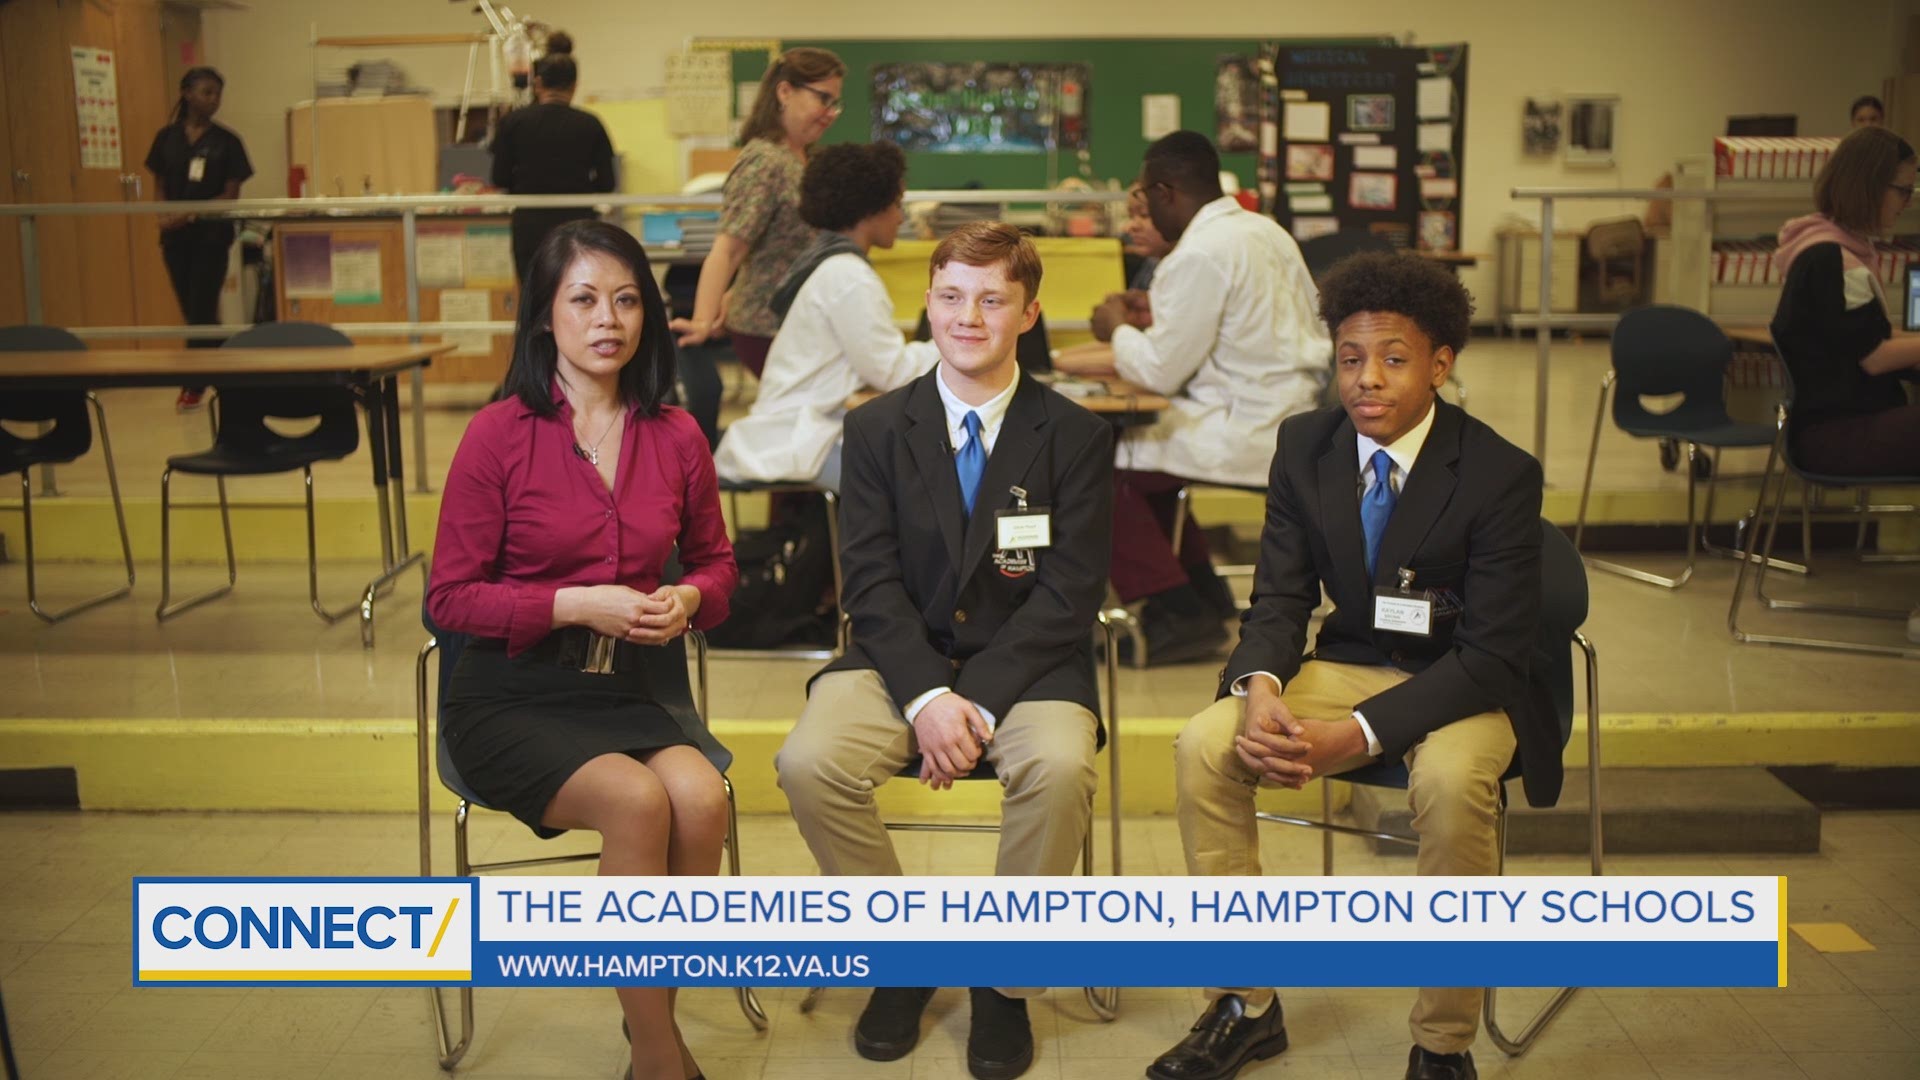 Two Bethel High School students tell us how Hampton City Schools' new approach to teaching has impacted them.